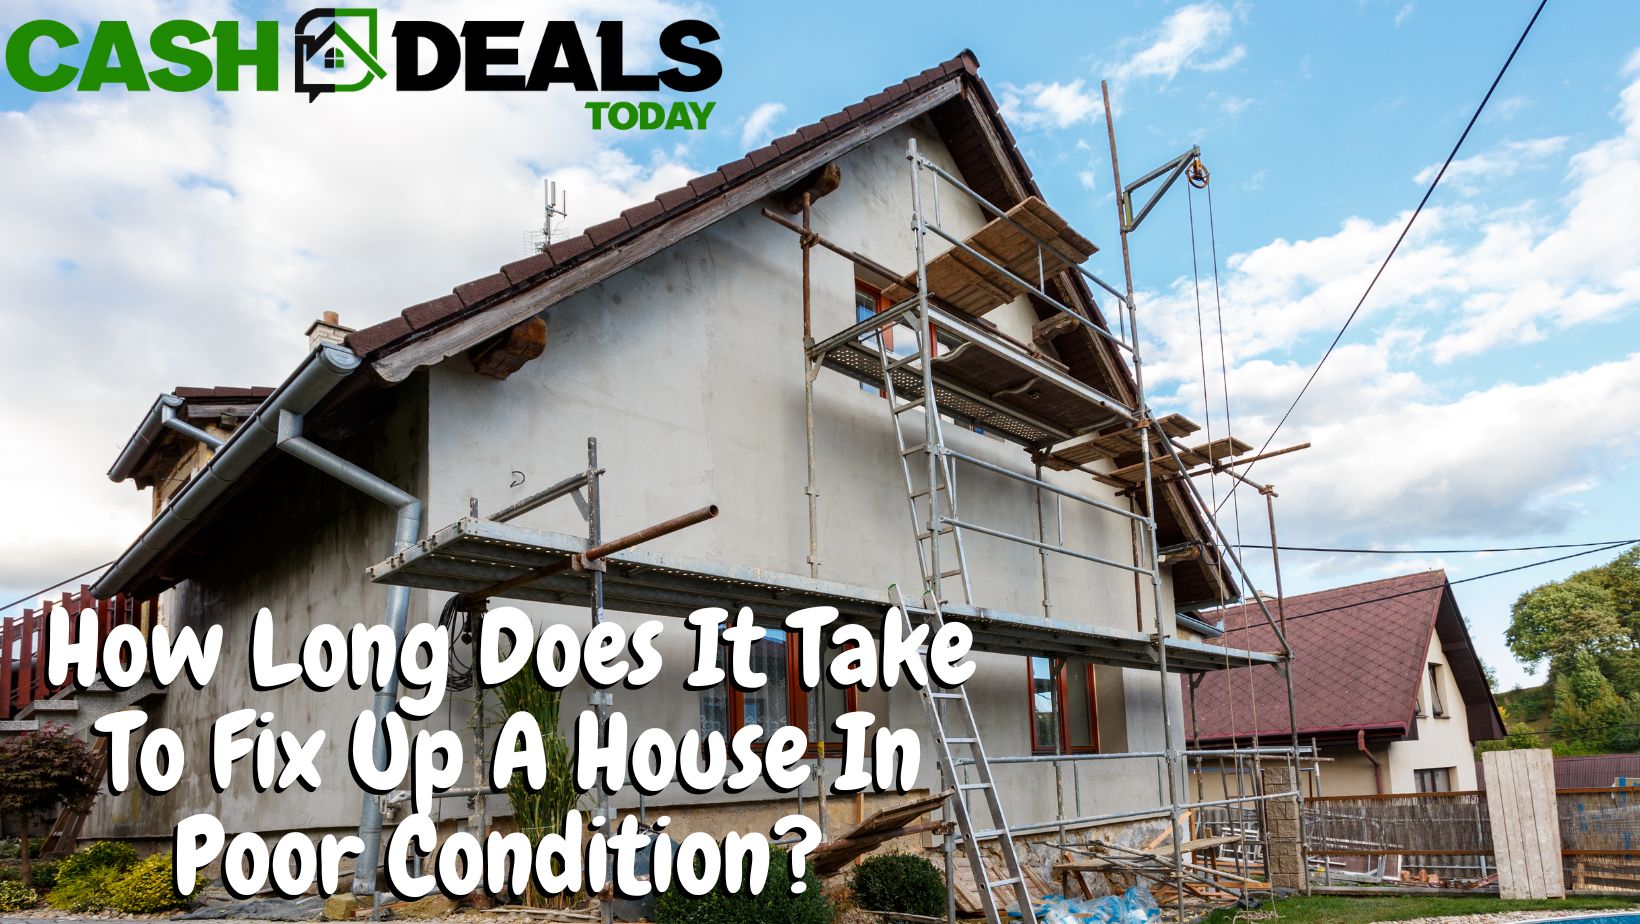 How Long Does It Take To Fix Up A House In Poor Condition?